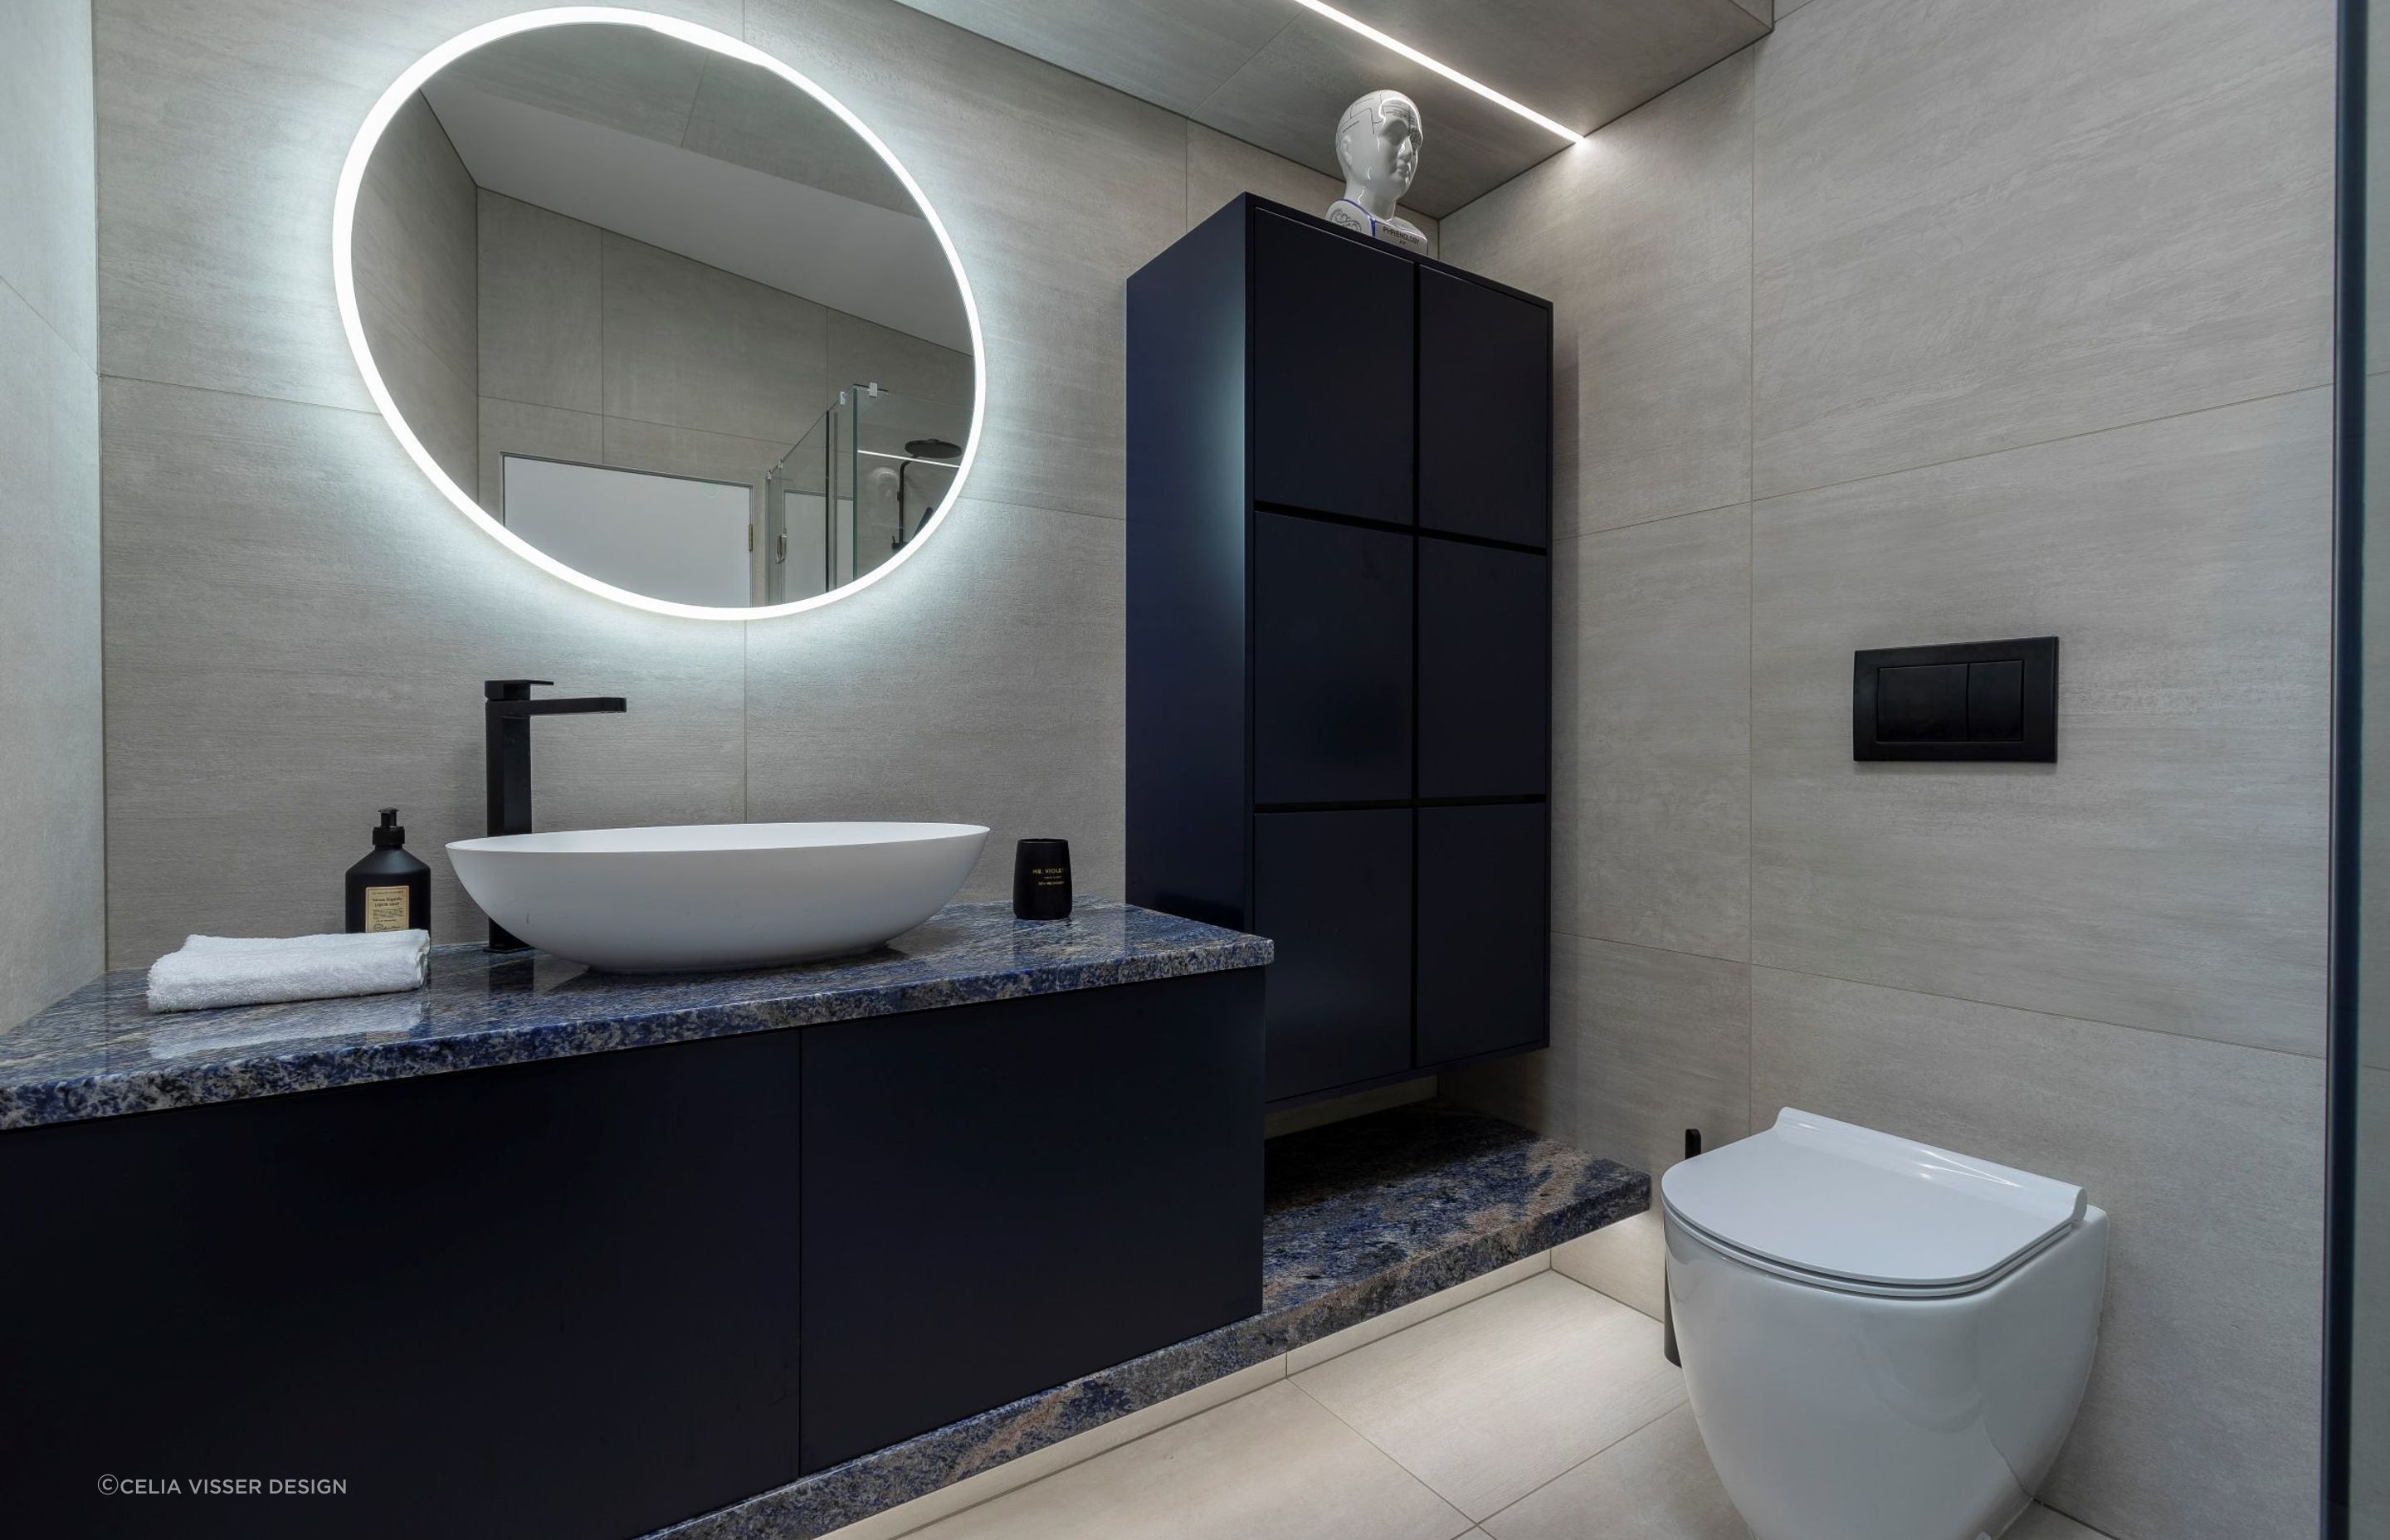 Employing a combination of different lighting fixtures can help eliminate dark spots that shroud a bathroom, expertly done in this Remuera bathroom.